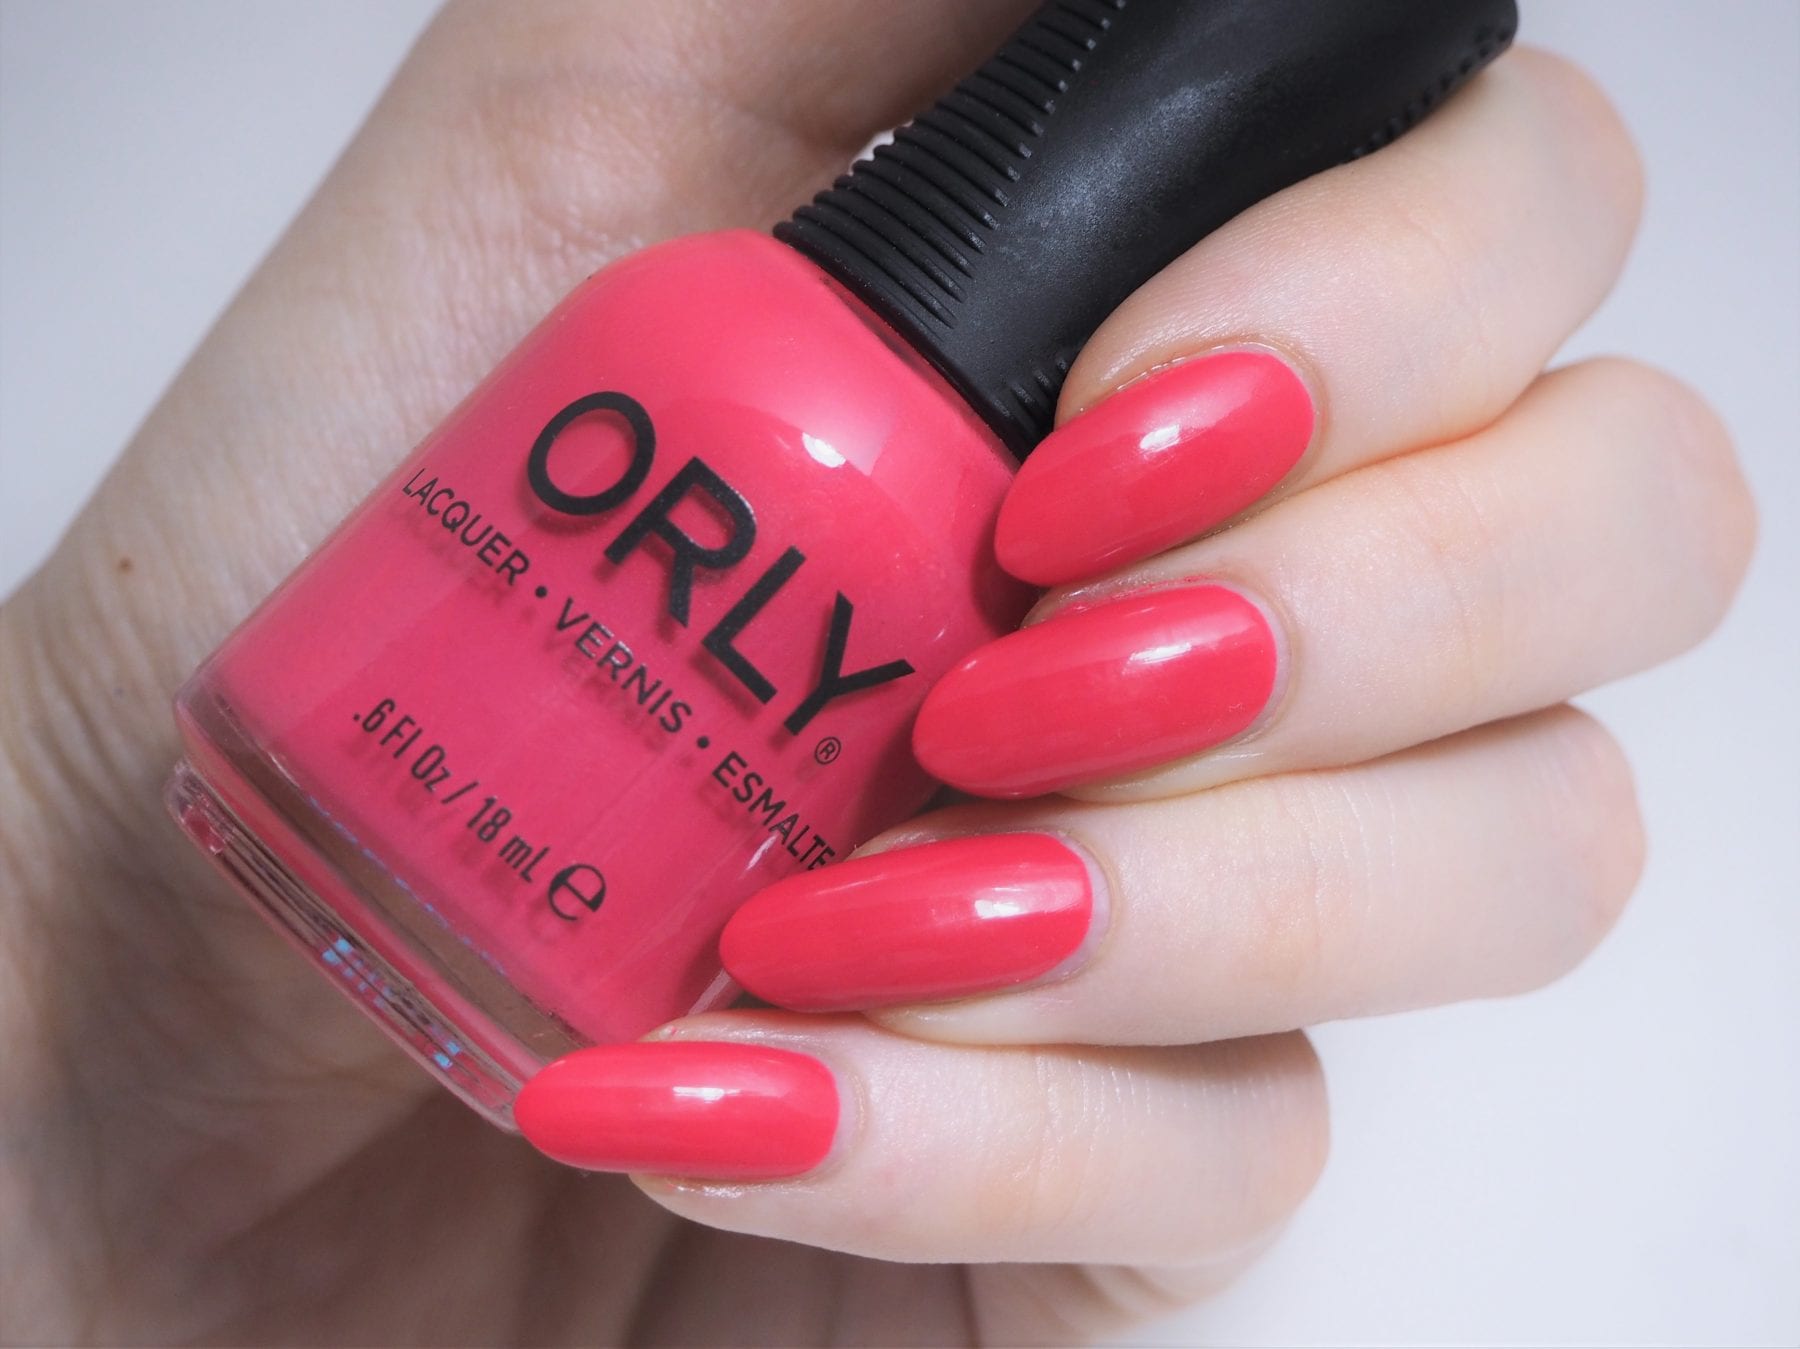 1. Orly Nail Lacquer in "Bare Rose" - wide 10